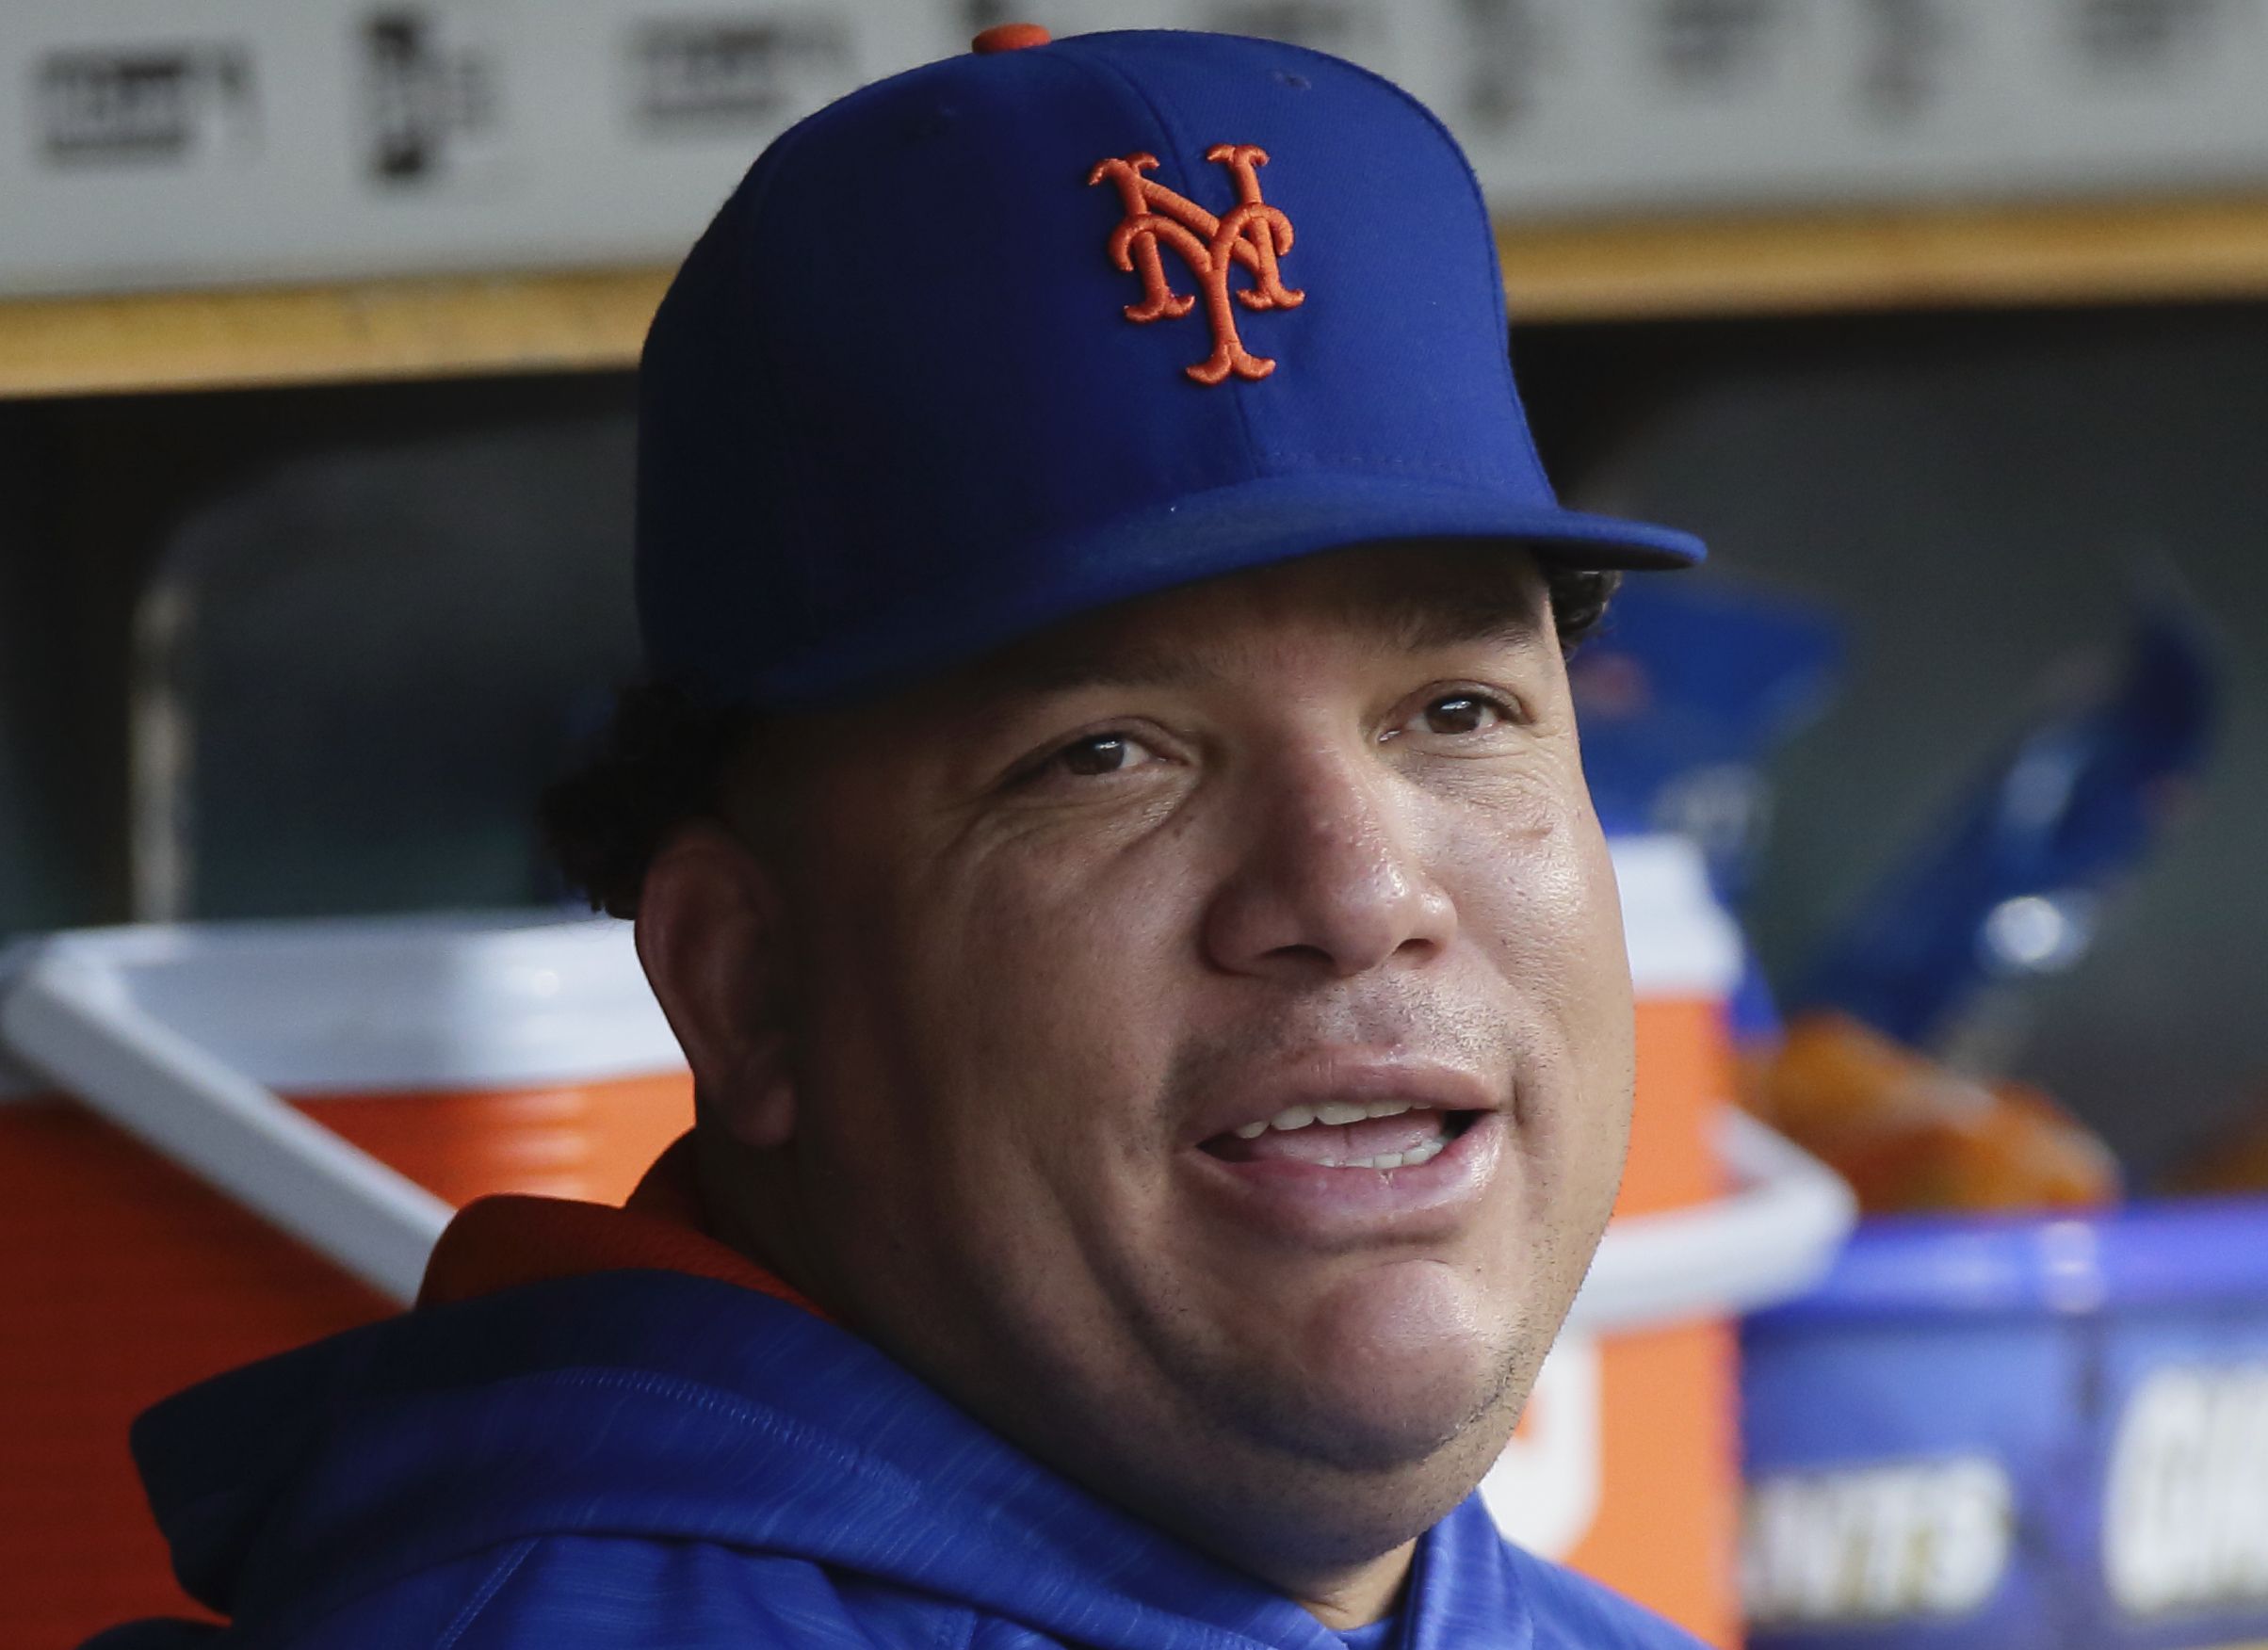 Bartolo Colon rejoining Mets at 47 would be as bad as calling up Tim Tebow  